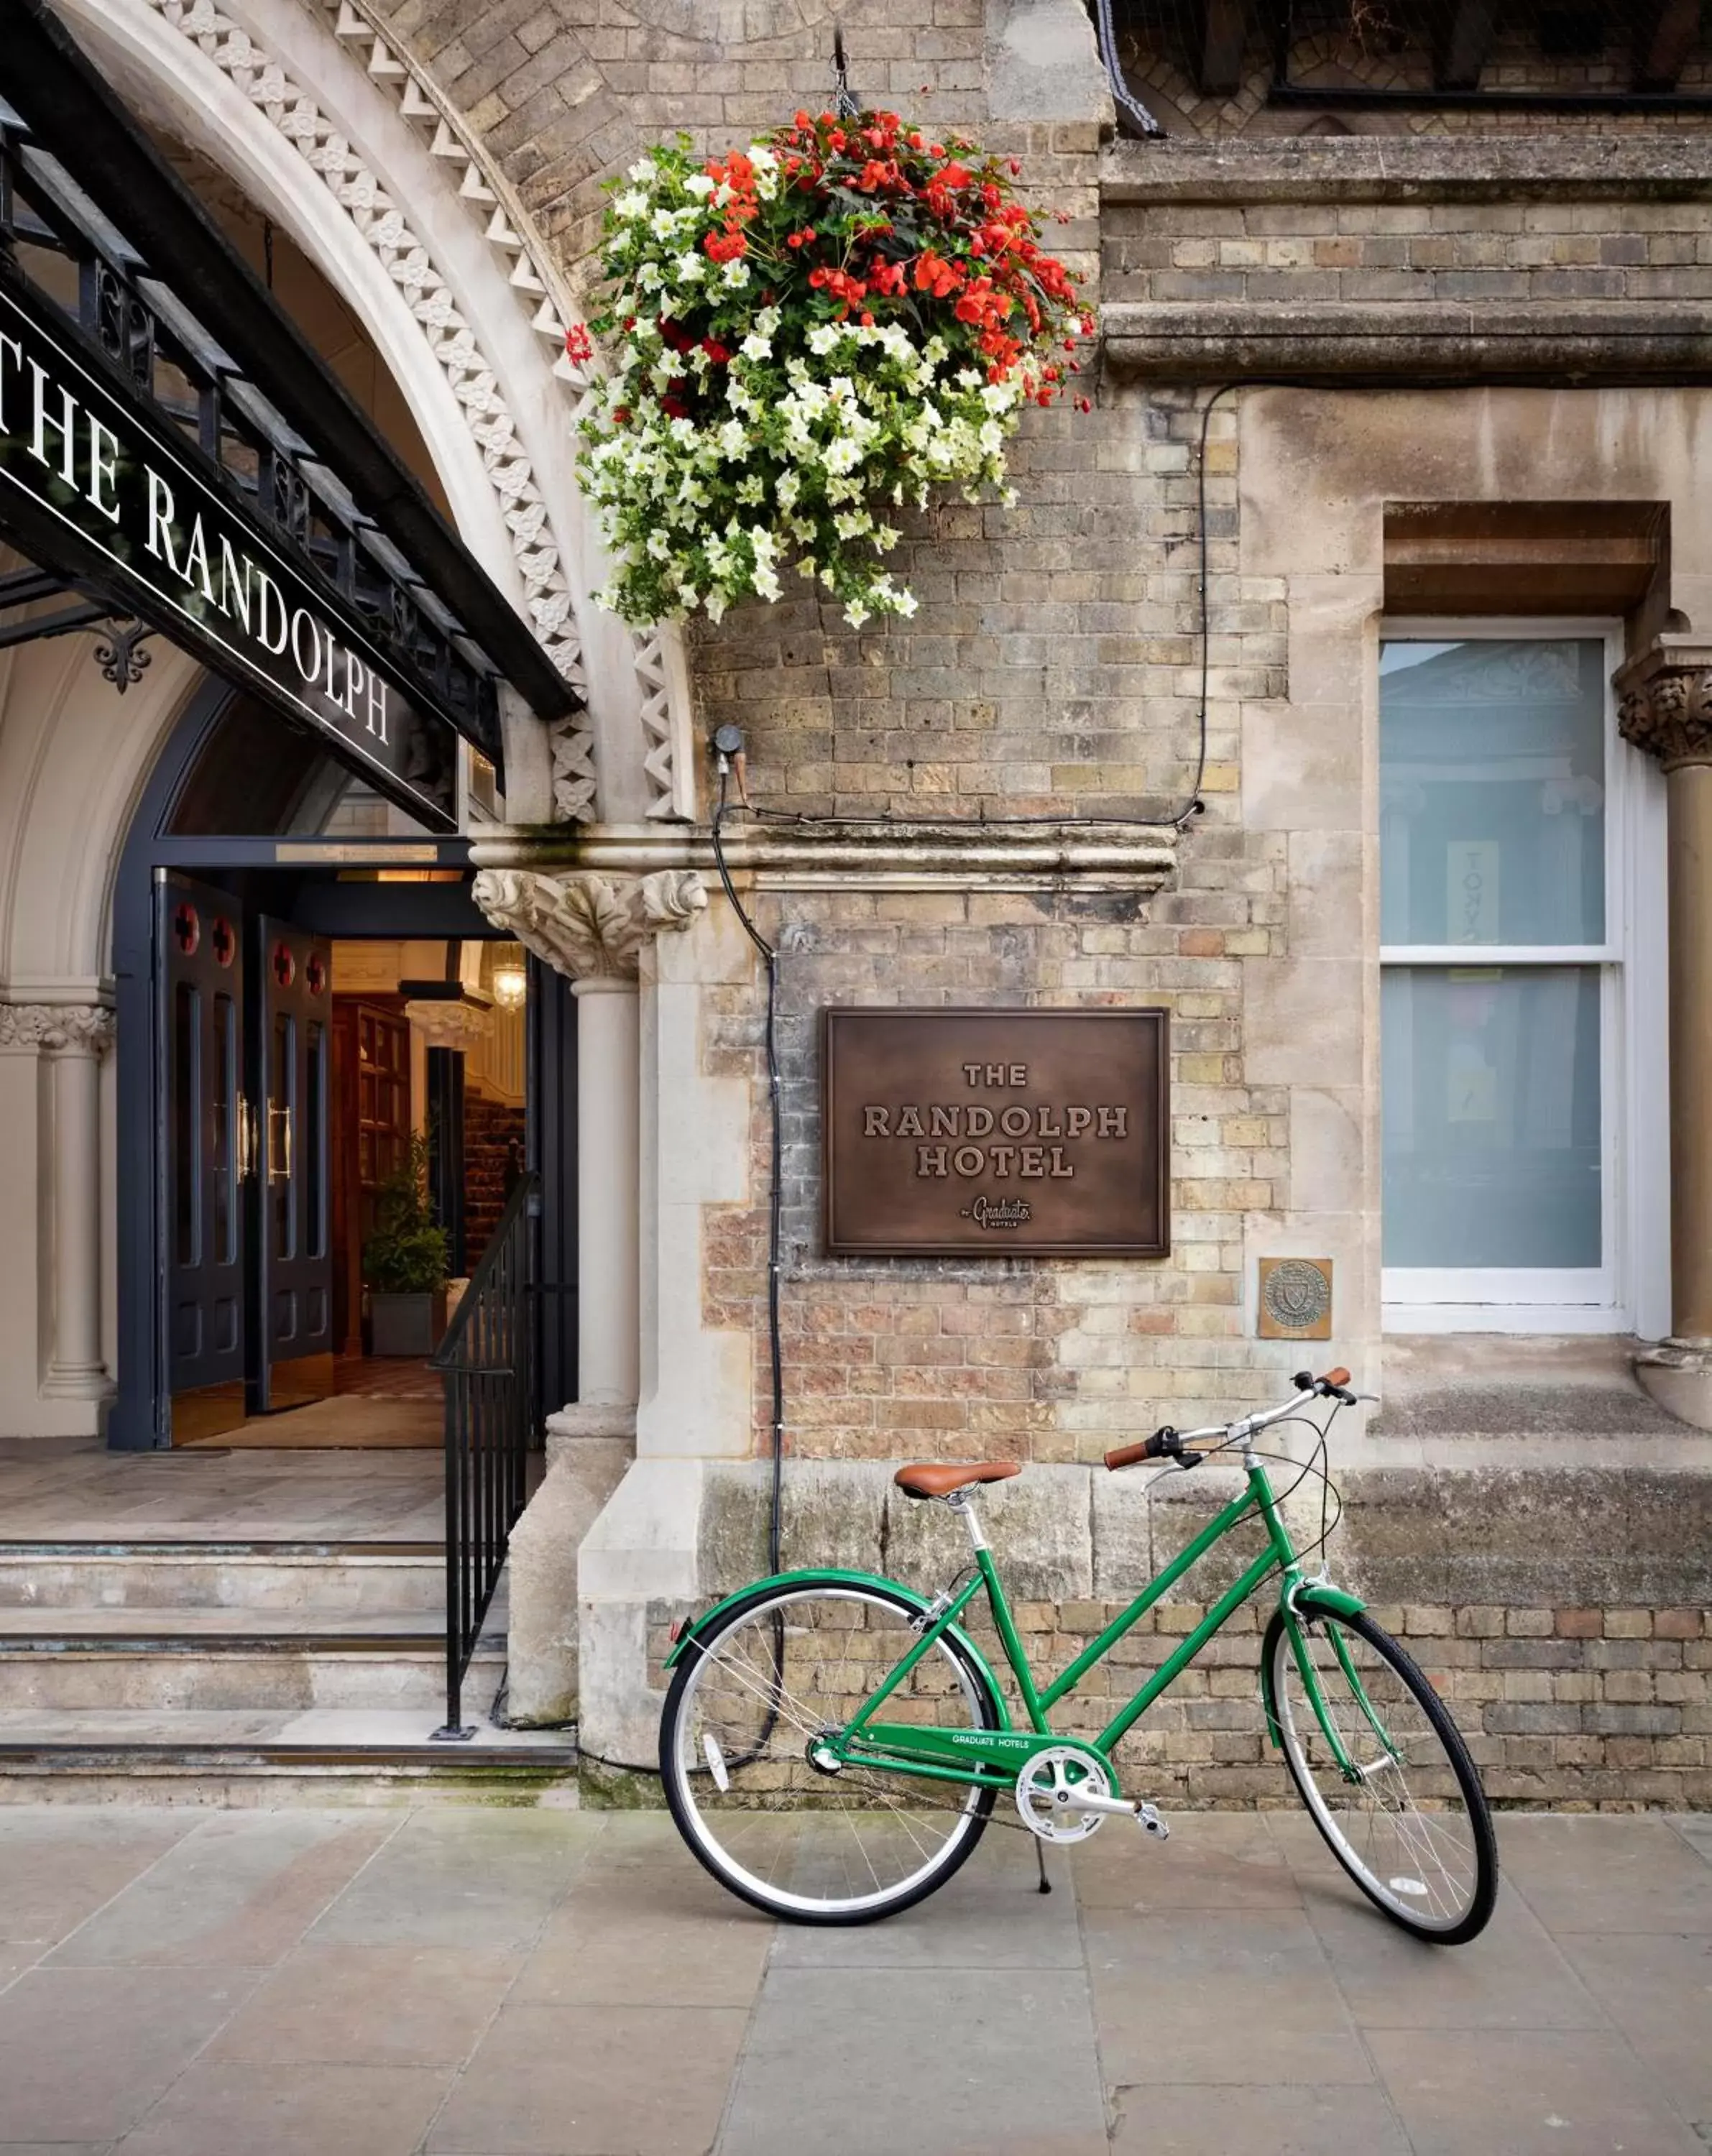 Cycling in The Randolph Hotel, by Graduate Hotels